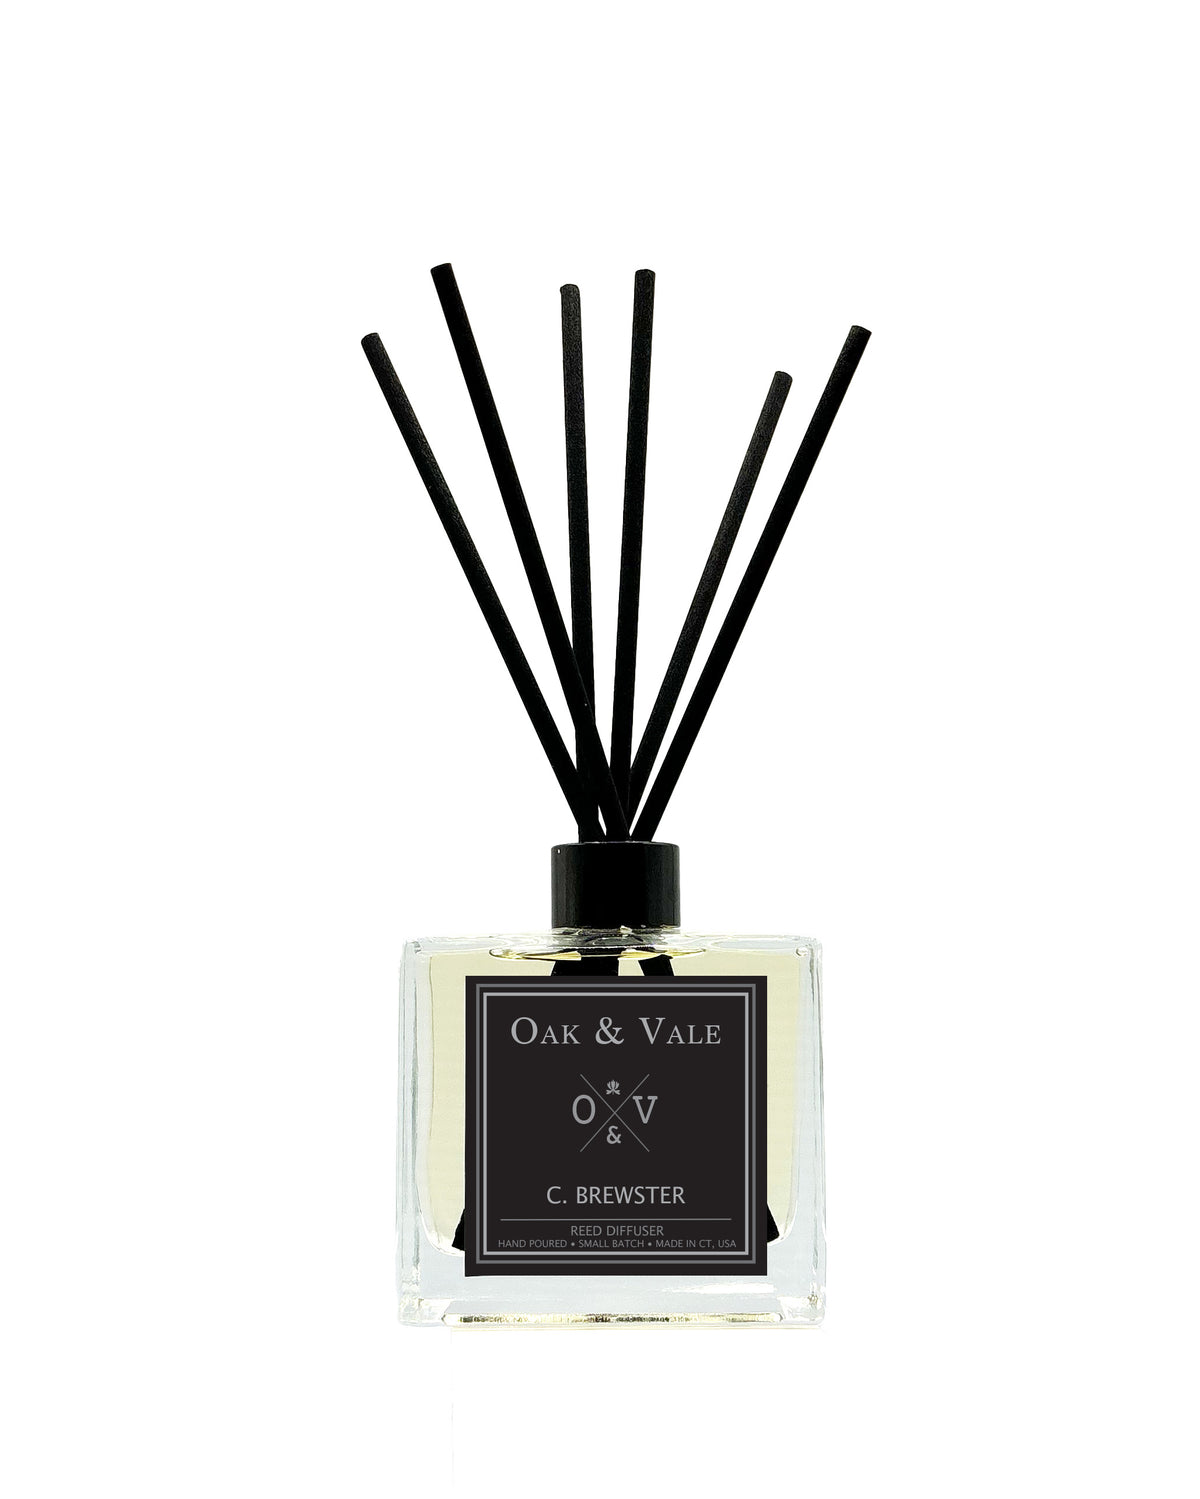 C. BREWSTER REED DIFFUSER